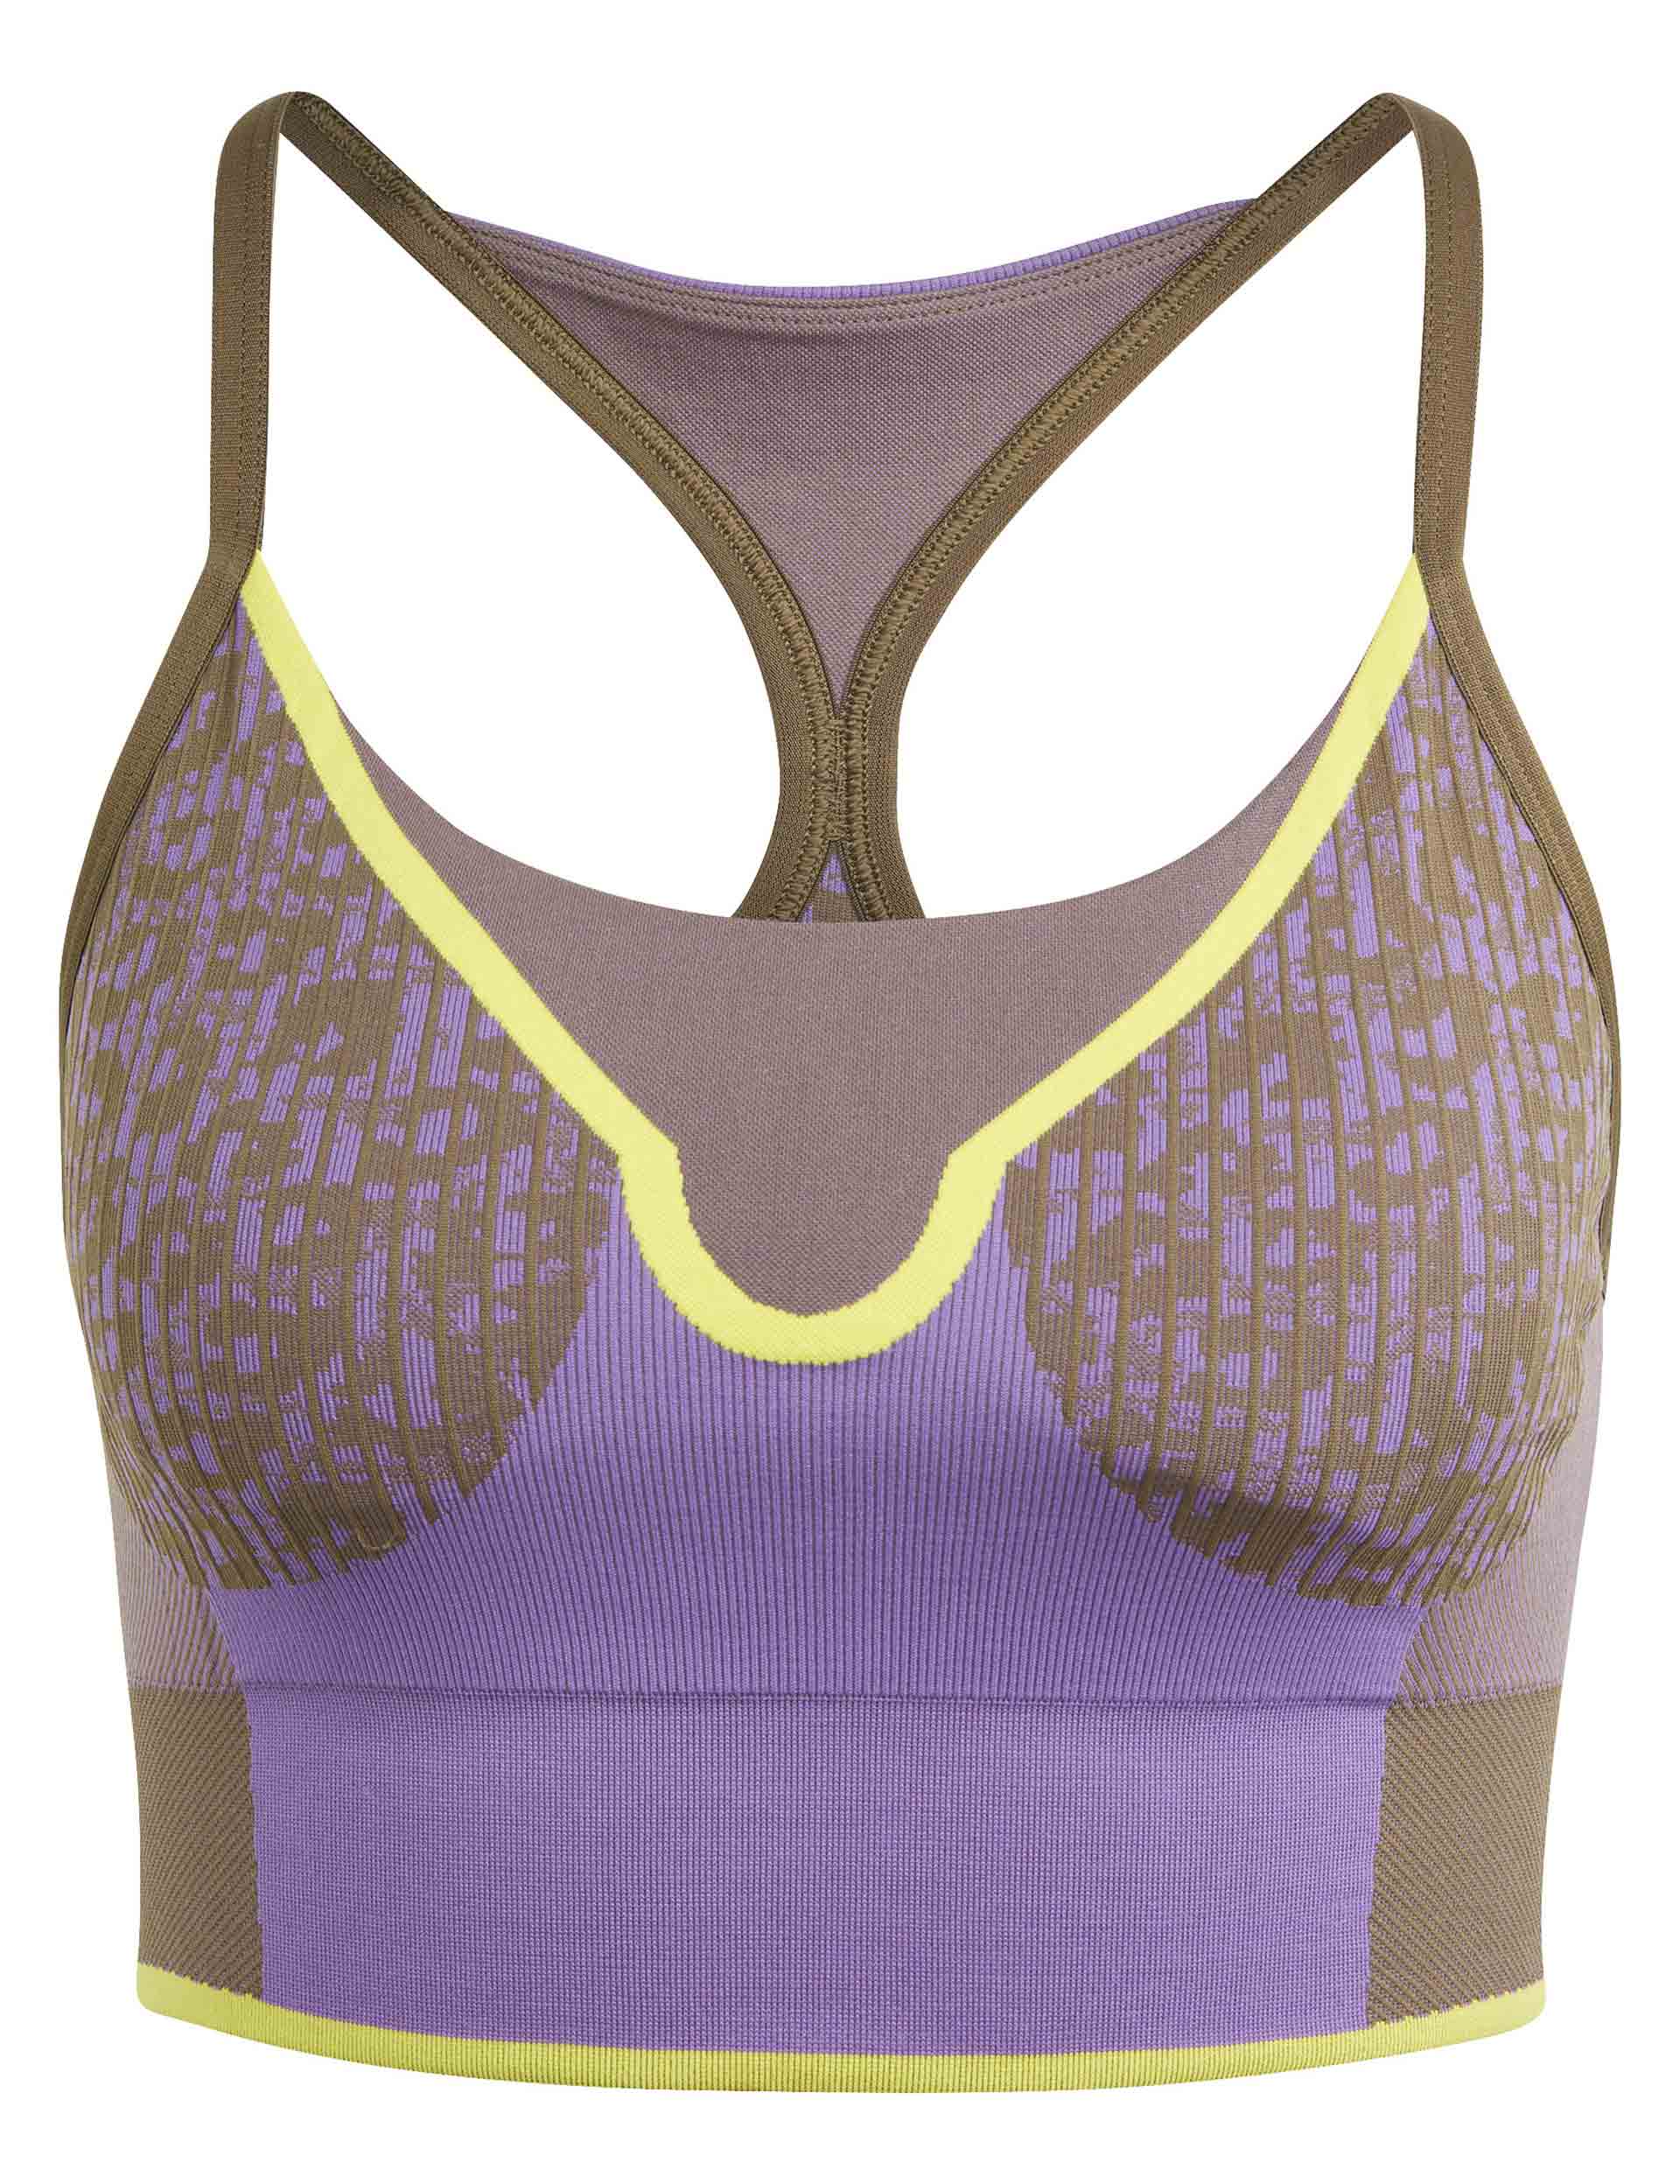 Adidas Originals Trefoil Moments sports bra in lilac and mint